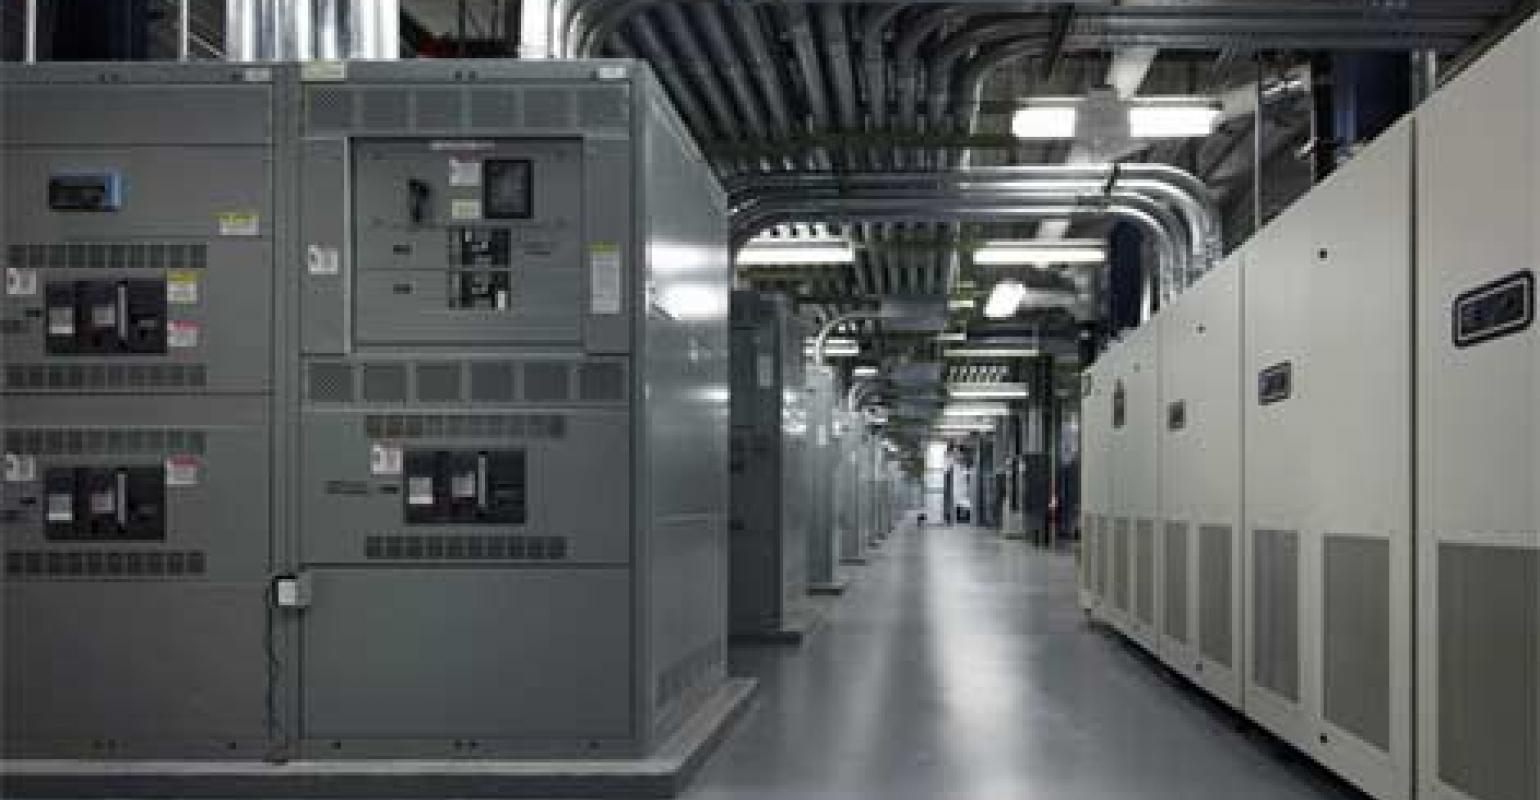 Power Distribution Units are Evolving Along With Data Centers | Data